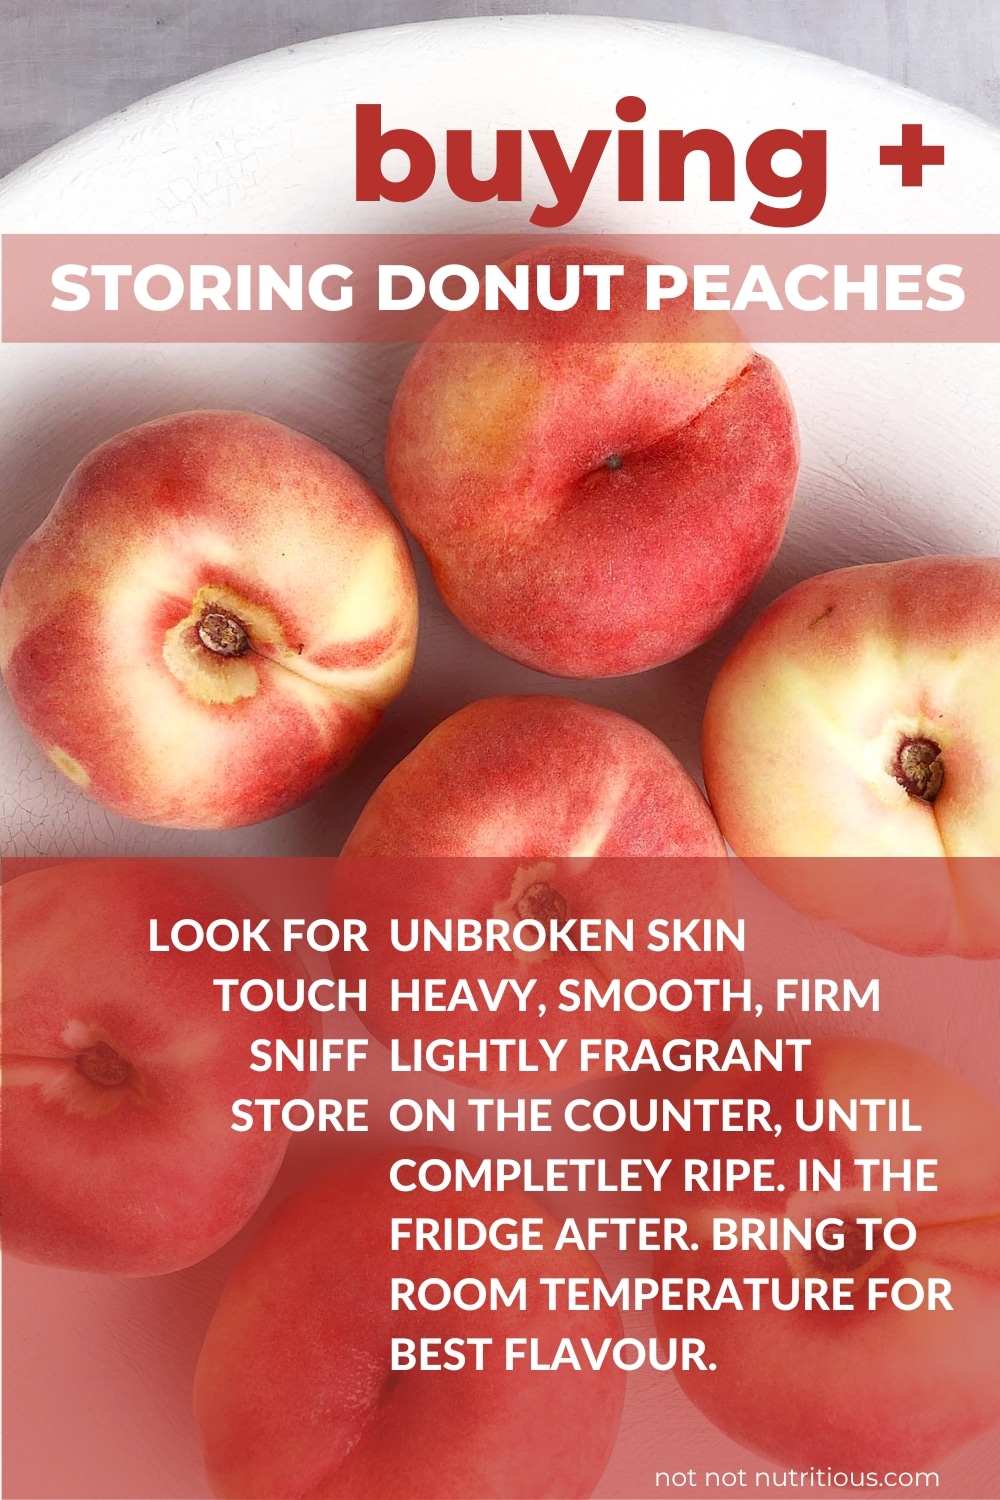 Infographic: Buying and storing peaches. Look for unbroken skin. They should be heavy, smooth, and firm to the touch. By sniff, they should be lightly fragrant. You should store peaches on the counter until completely ripe. Store in the fridge after but bring to room temperature before eating. 